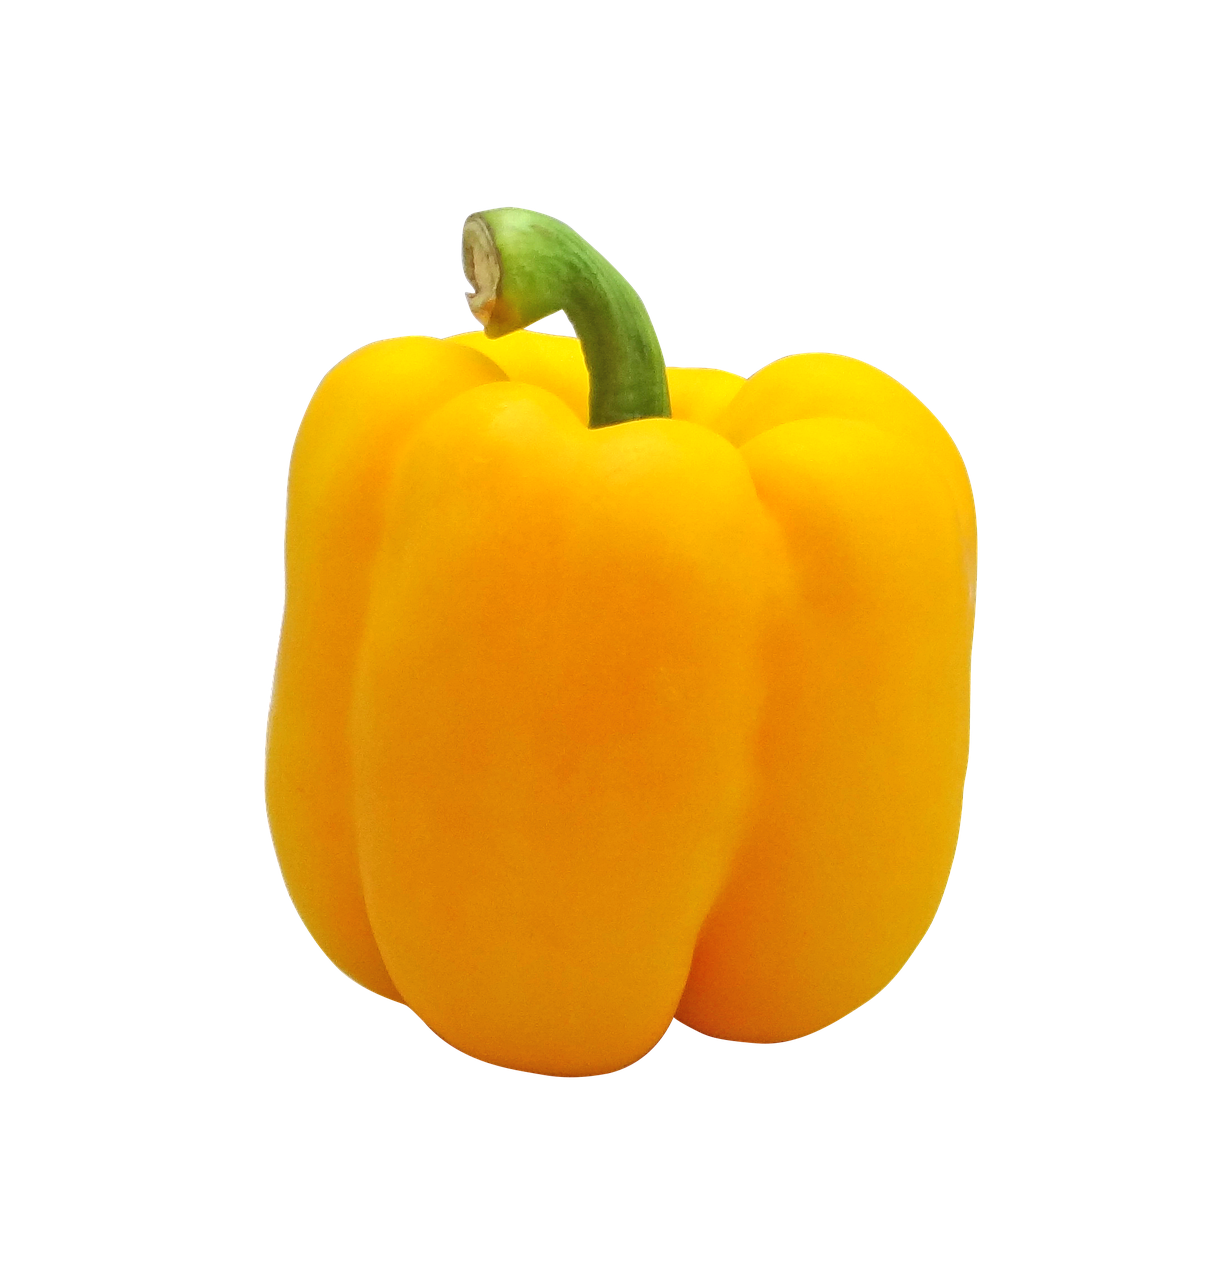 a yellow bell pepper on a black background, renaissance, full color, the background is white, shot from professional camera, rectangular